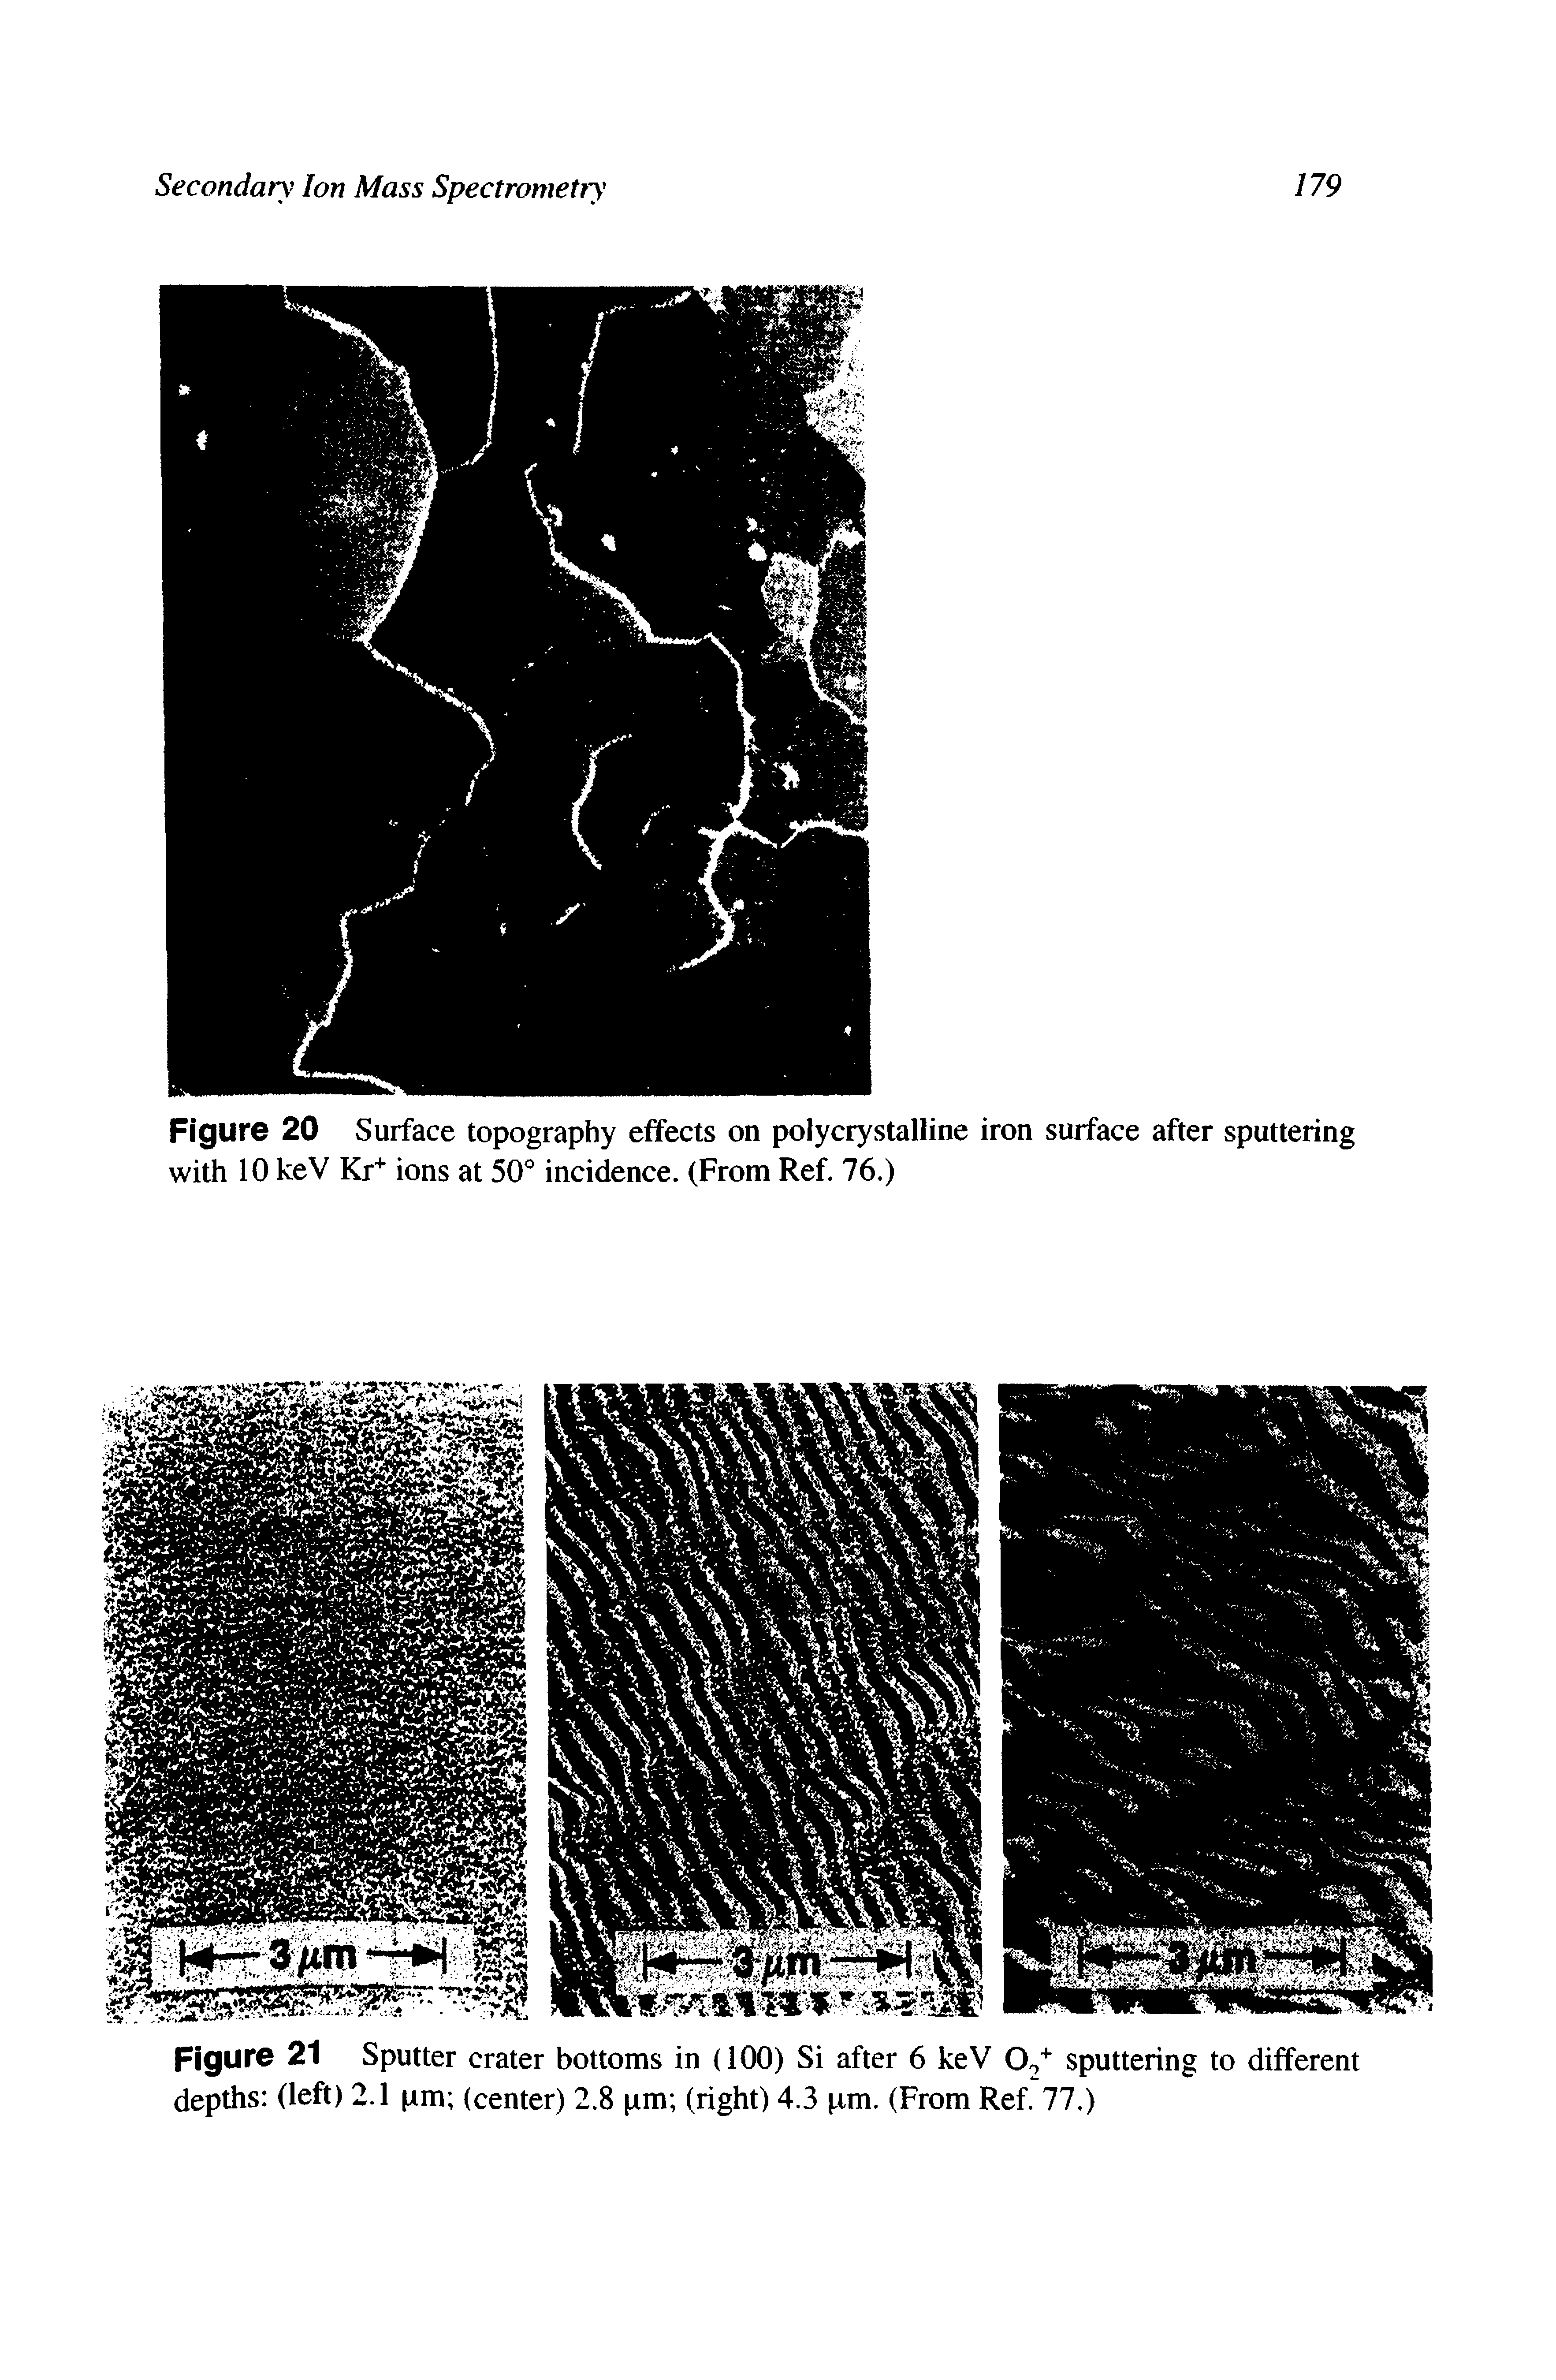 Figure 20 Surface topography effects on polycrystalline iron surface after sputtering with 10 keV Kr+ ions at 50° incidence. (From Ref. 76.)...